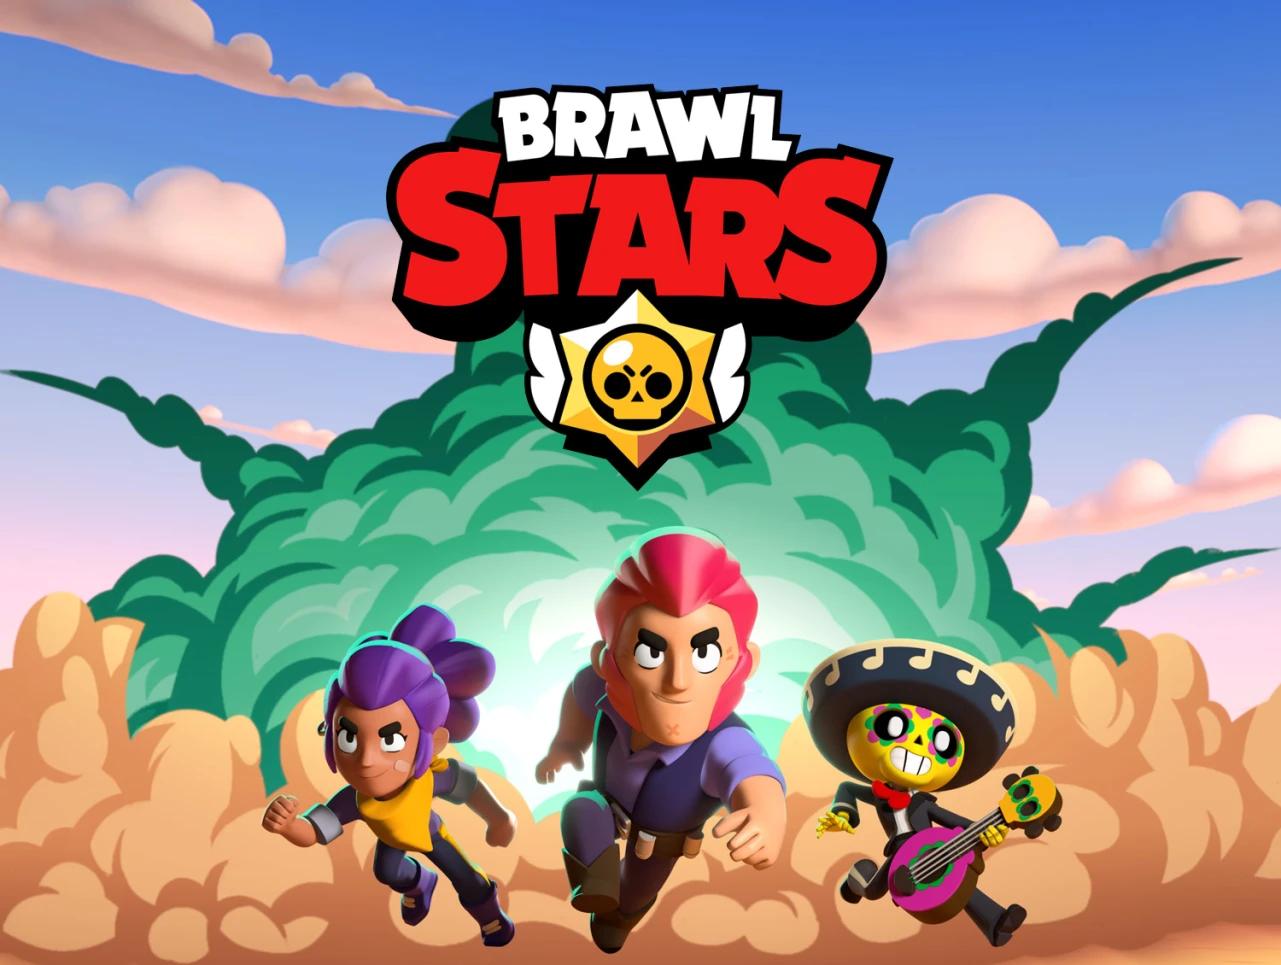 Brawl Stars - It's now much faster and easier to gain Trophies